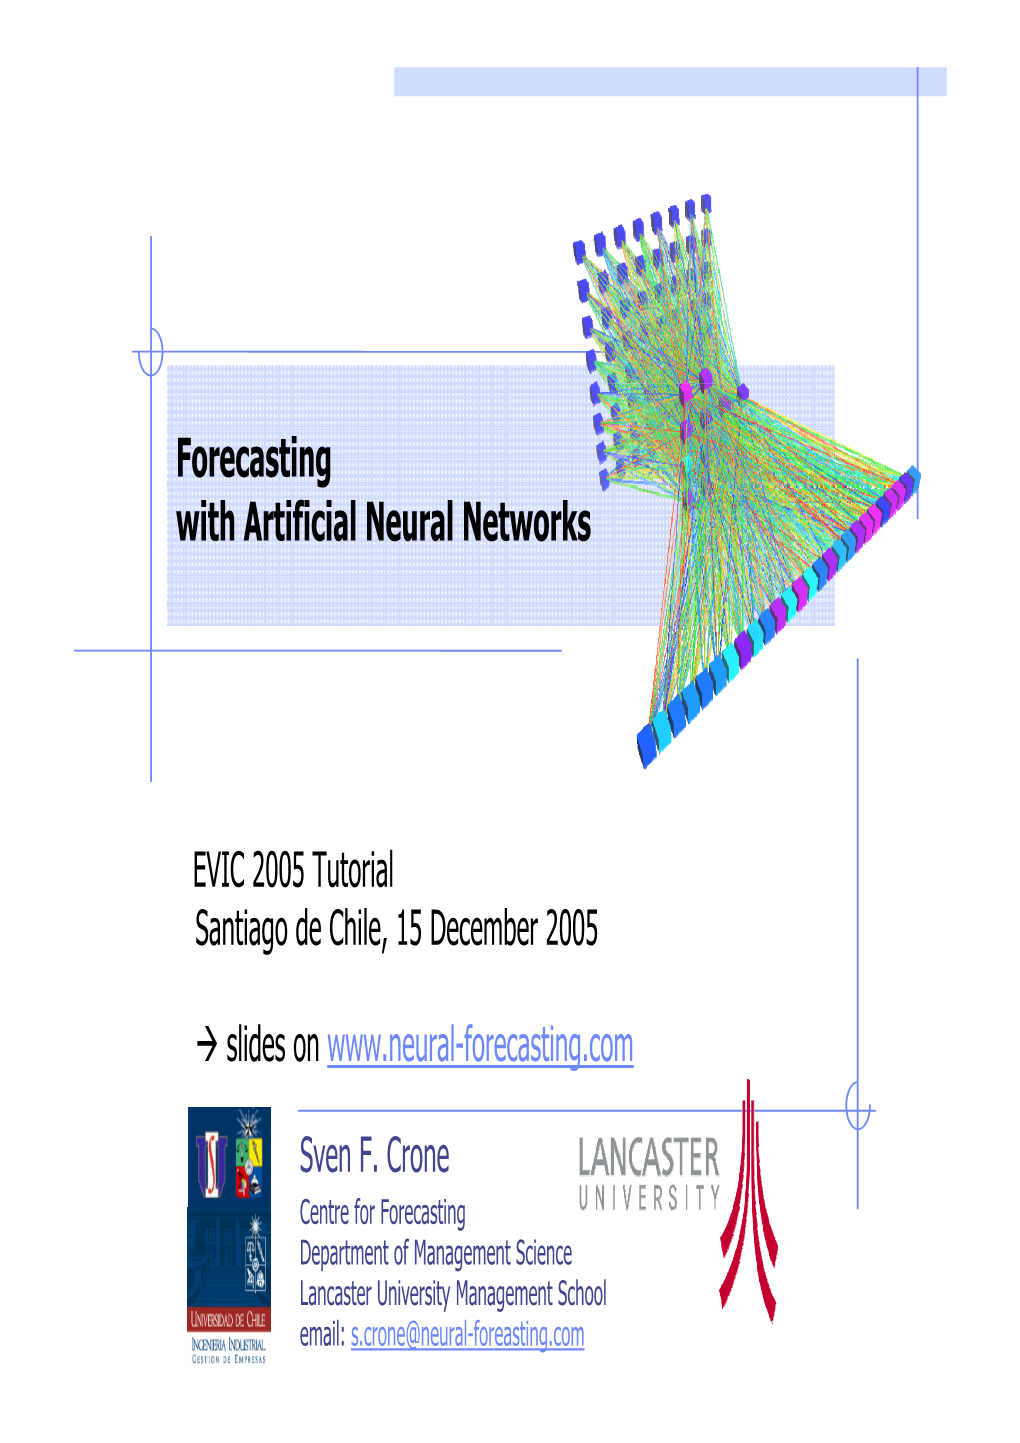 Forecasting with Artificial Neural Networks